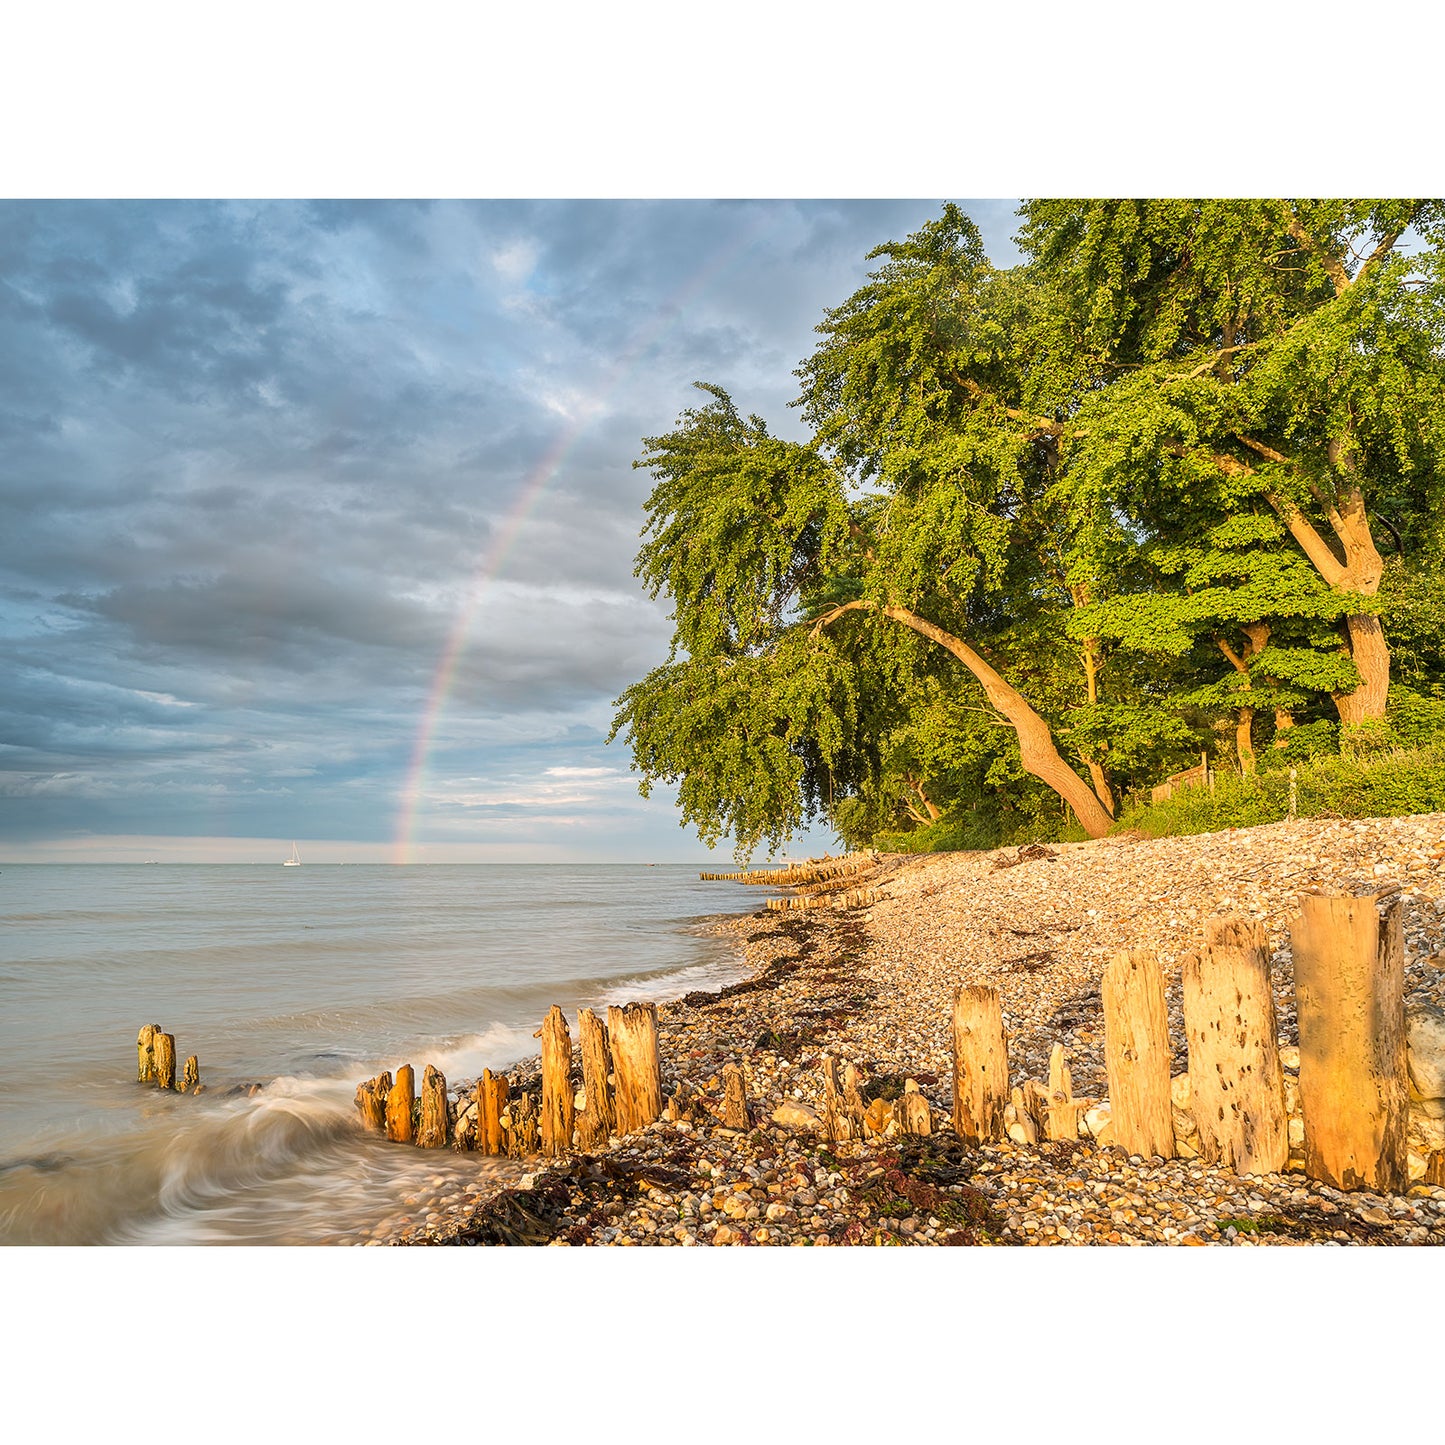 A serene beachscape of Bembridge Beach on the Isle of Wight with a partial rainbow over the sea, aged wooden breakwaters in the foreground, and lush green trees along the coastline, captured by Available Light Photography.